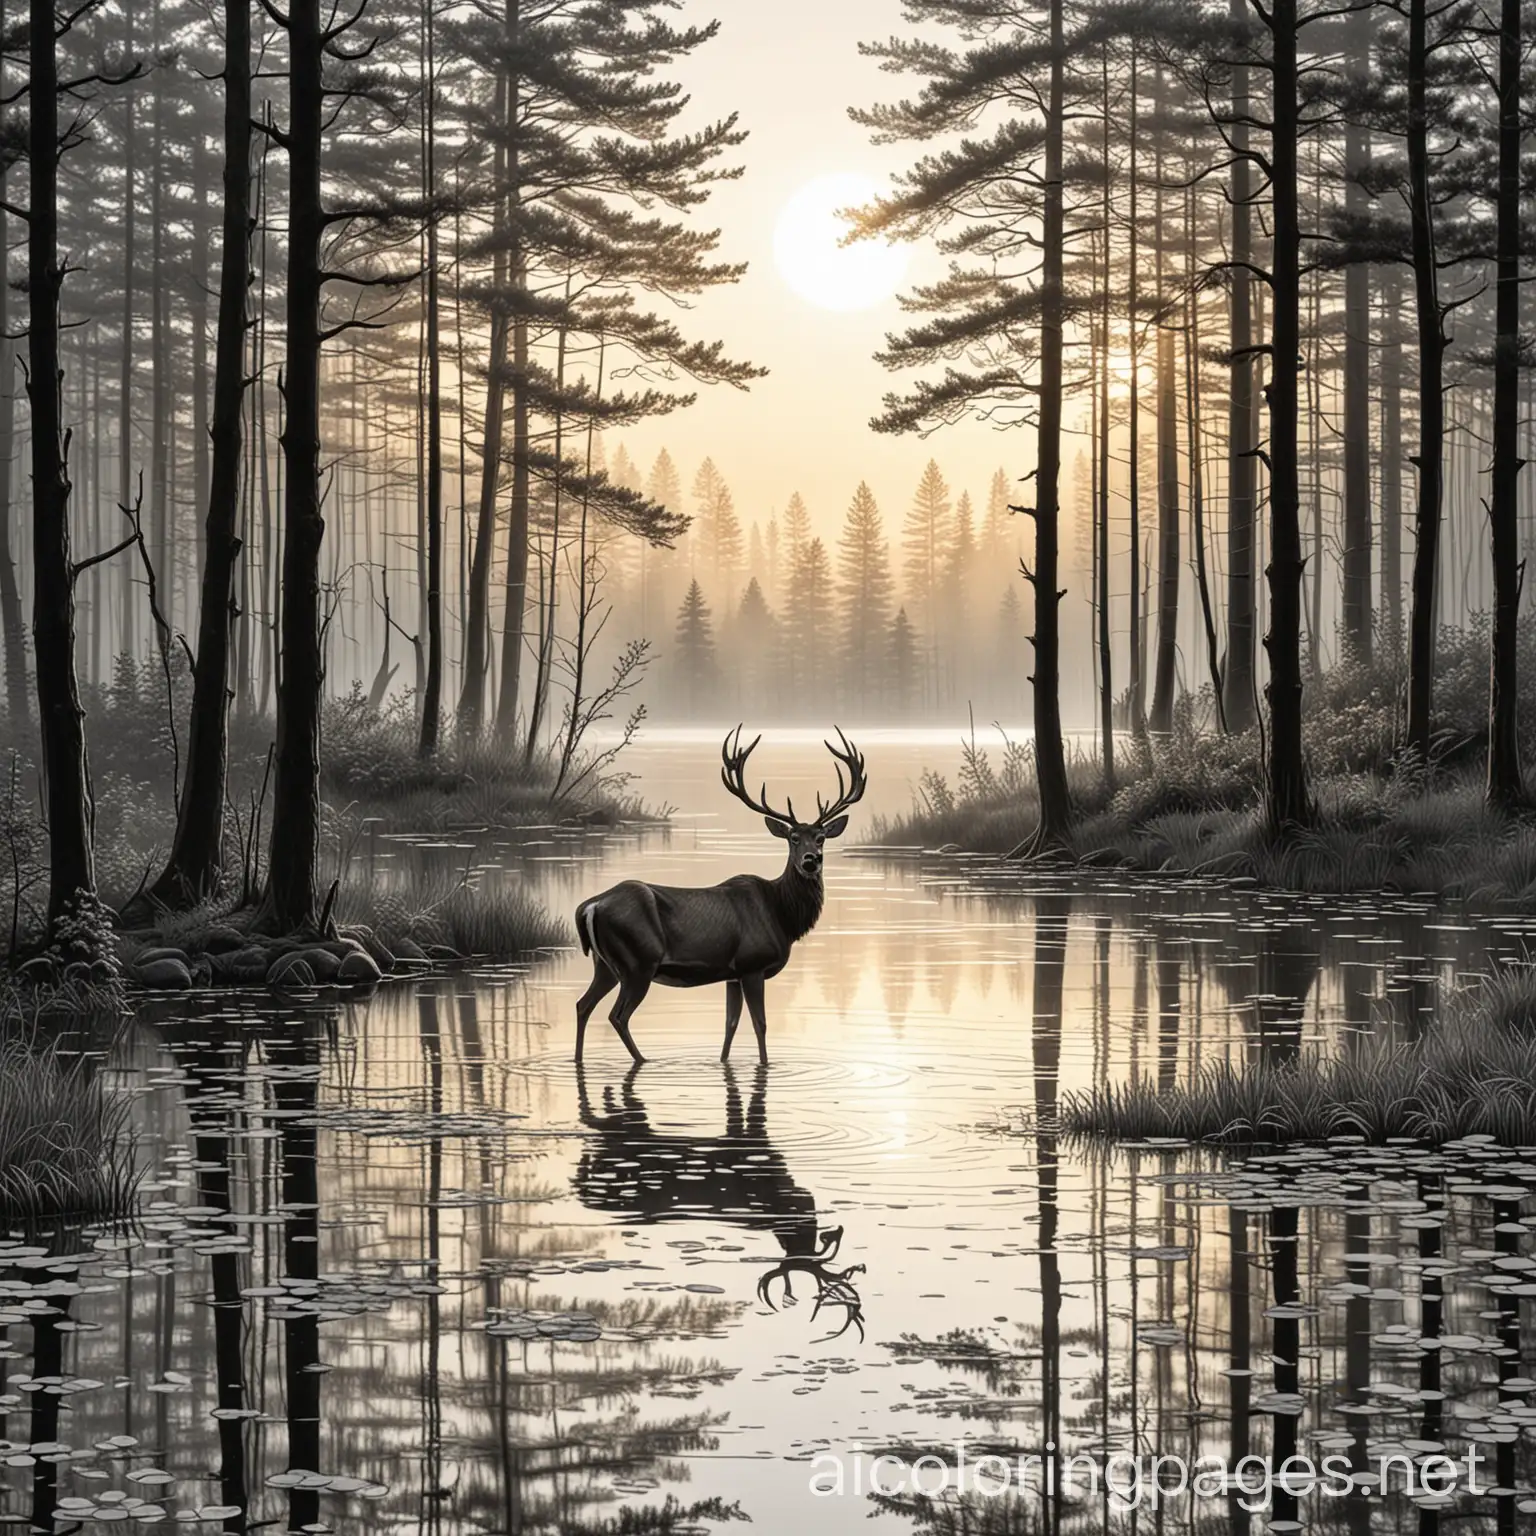 Majestic-Deer-Silhouette-in-Tranquil-Forest-Pond-at-Sunrise